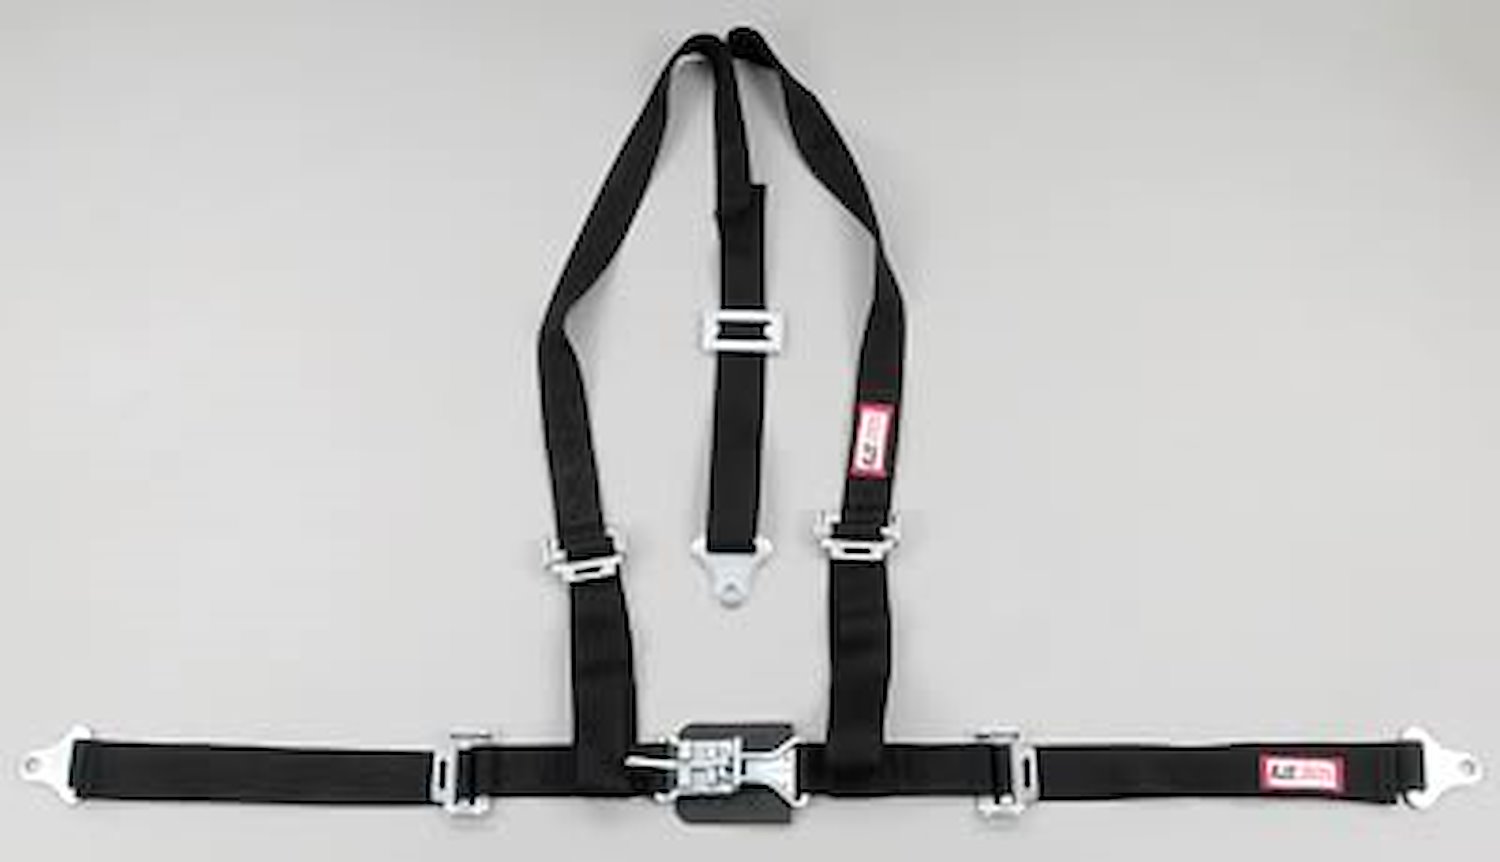 NON-SFI L&L HARNESS 2 PULL DOWN Lap Belt w/Adjuster SNAP 2 S.H. Y FLOOR MOUNT w/STERNUM STRAP WRAP/SNAP YELLOW